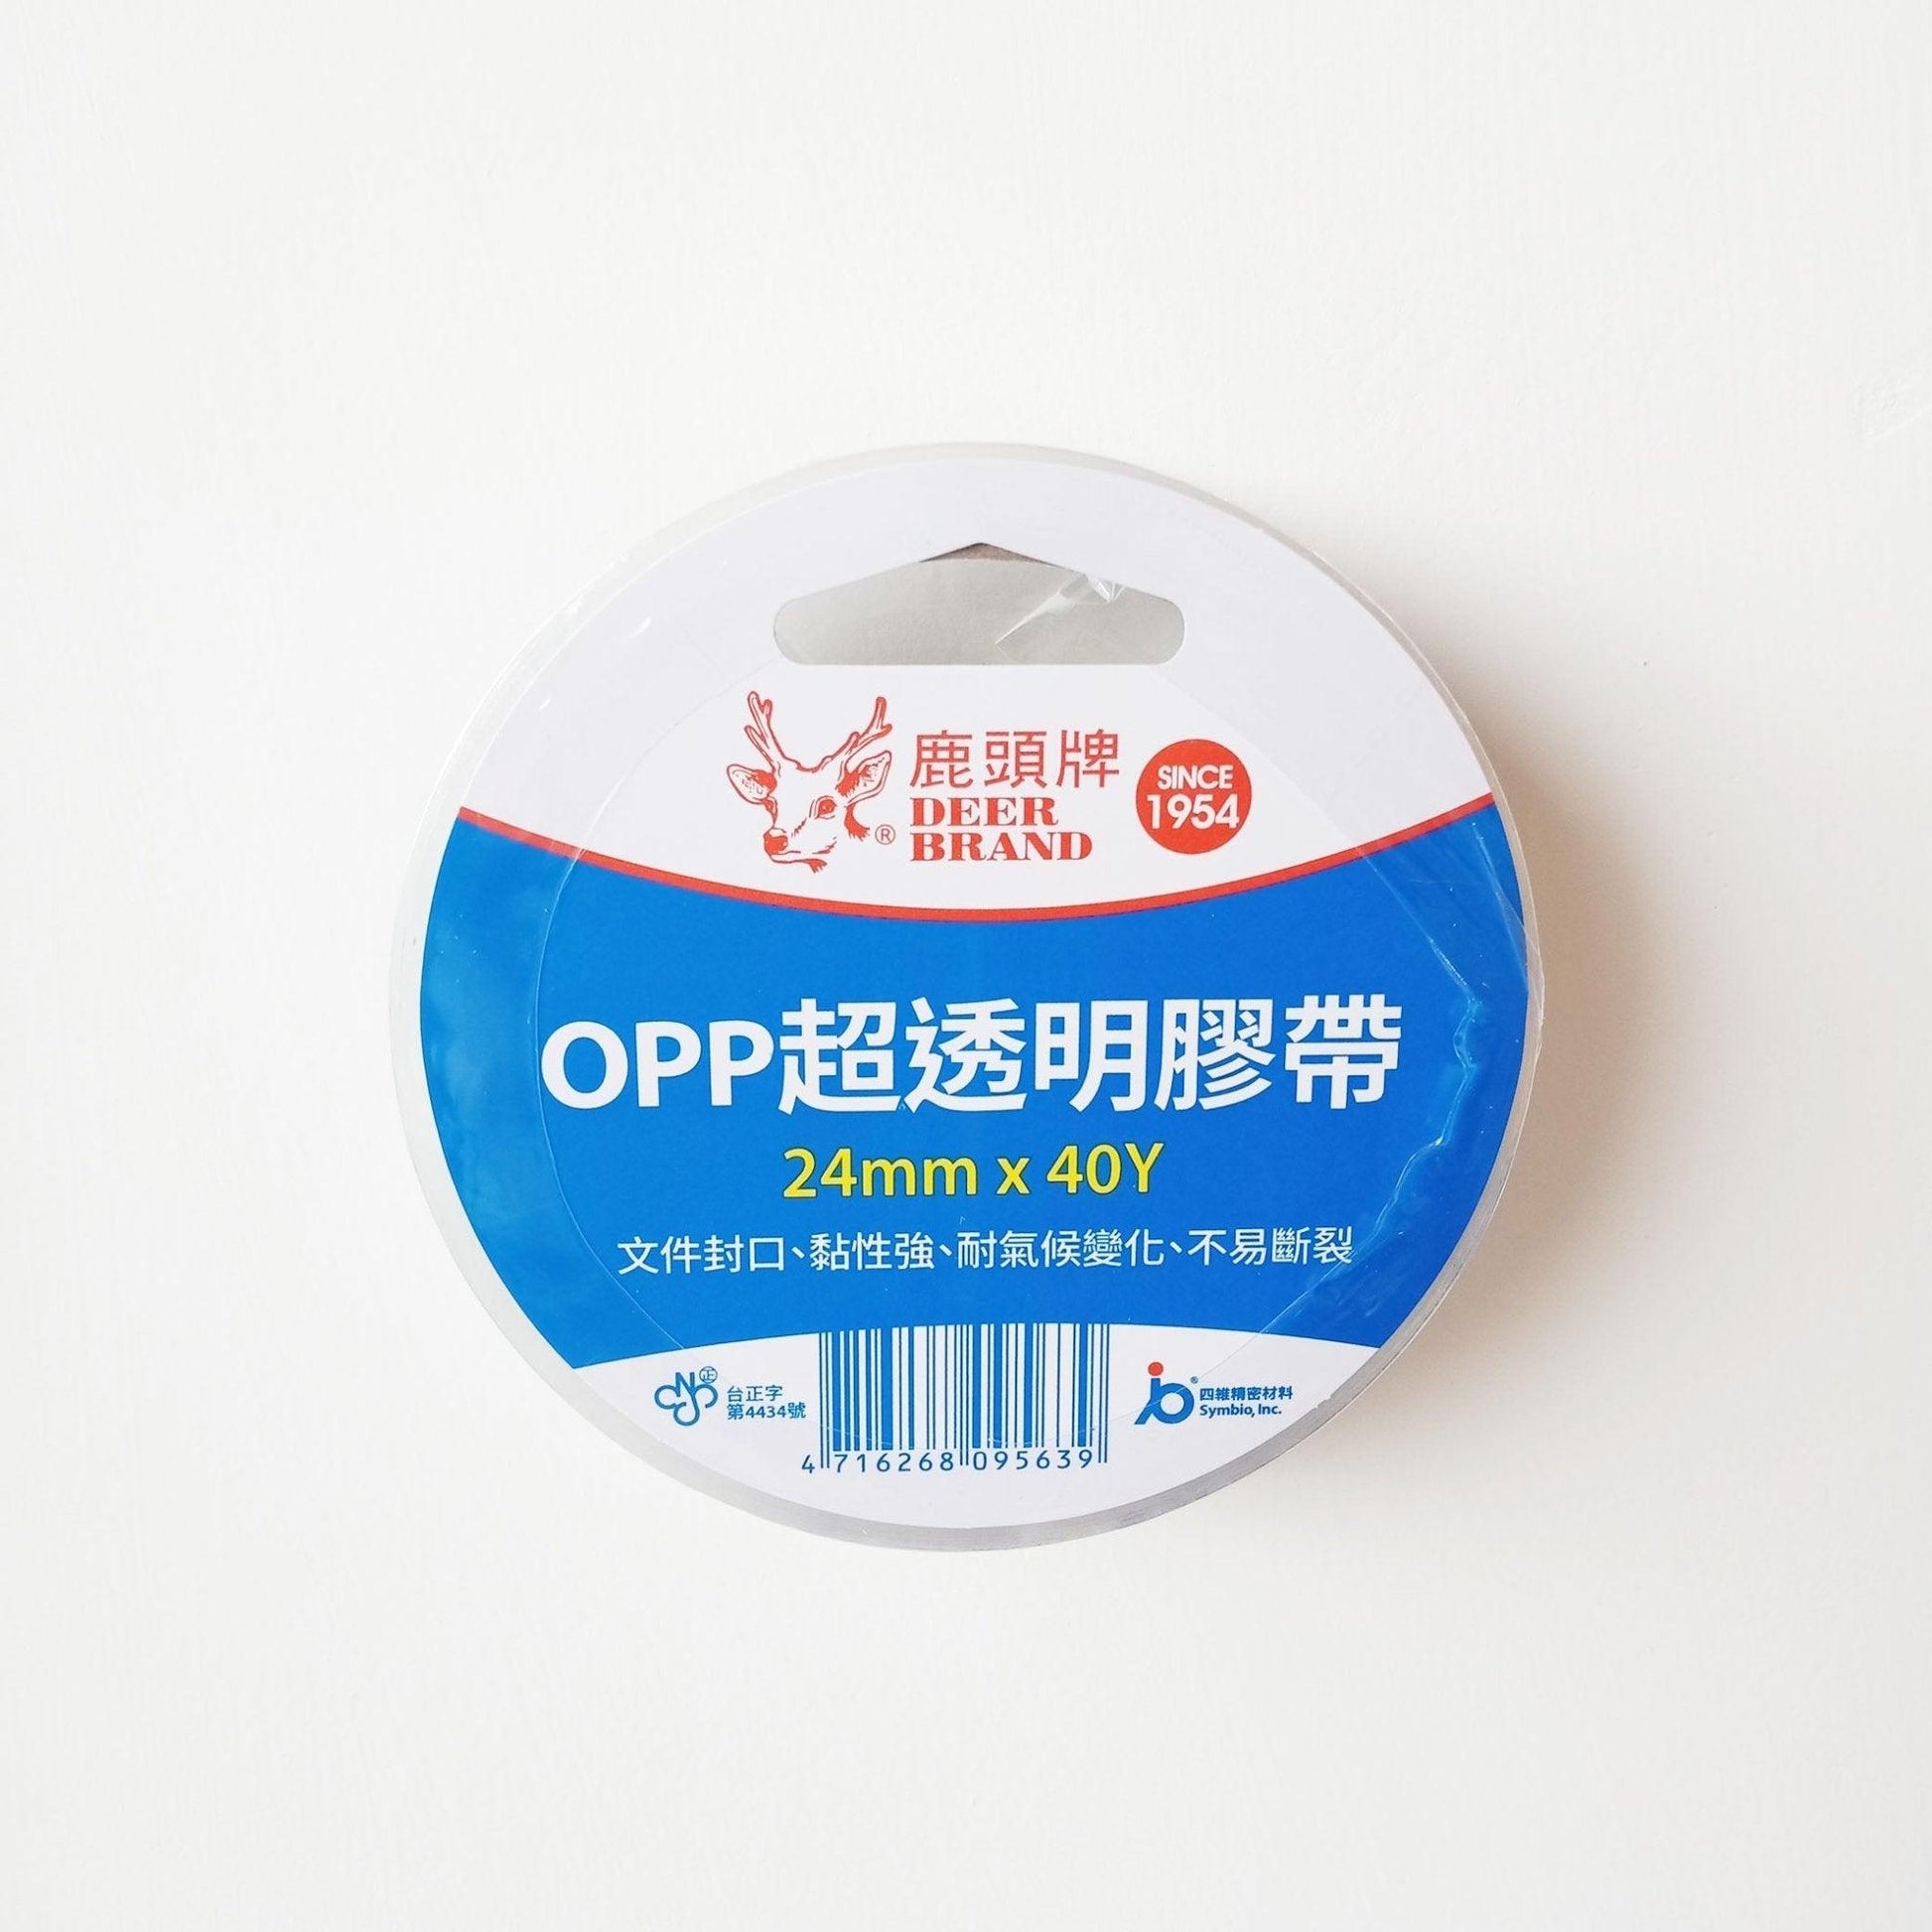 Deer Brand OPP Ultra Clear Tape 24mm40Y Scotch tape Packaging tape PPS7 single roll - CHL-STORE 